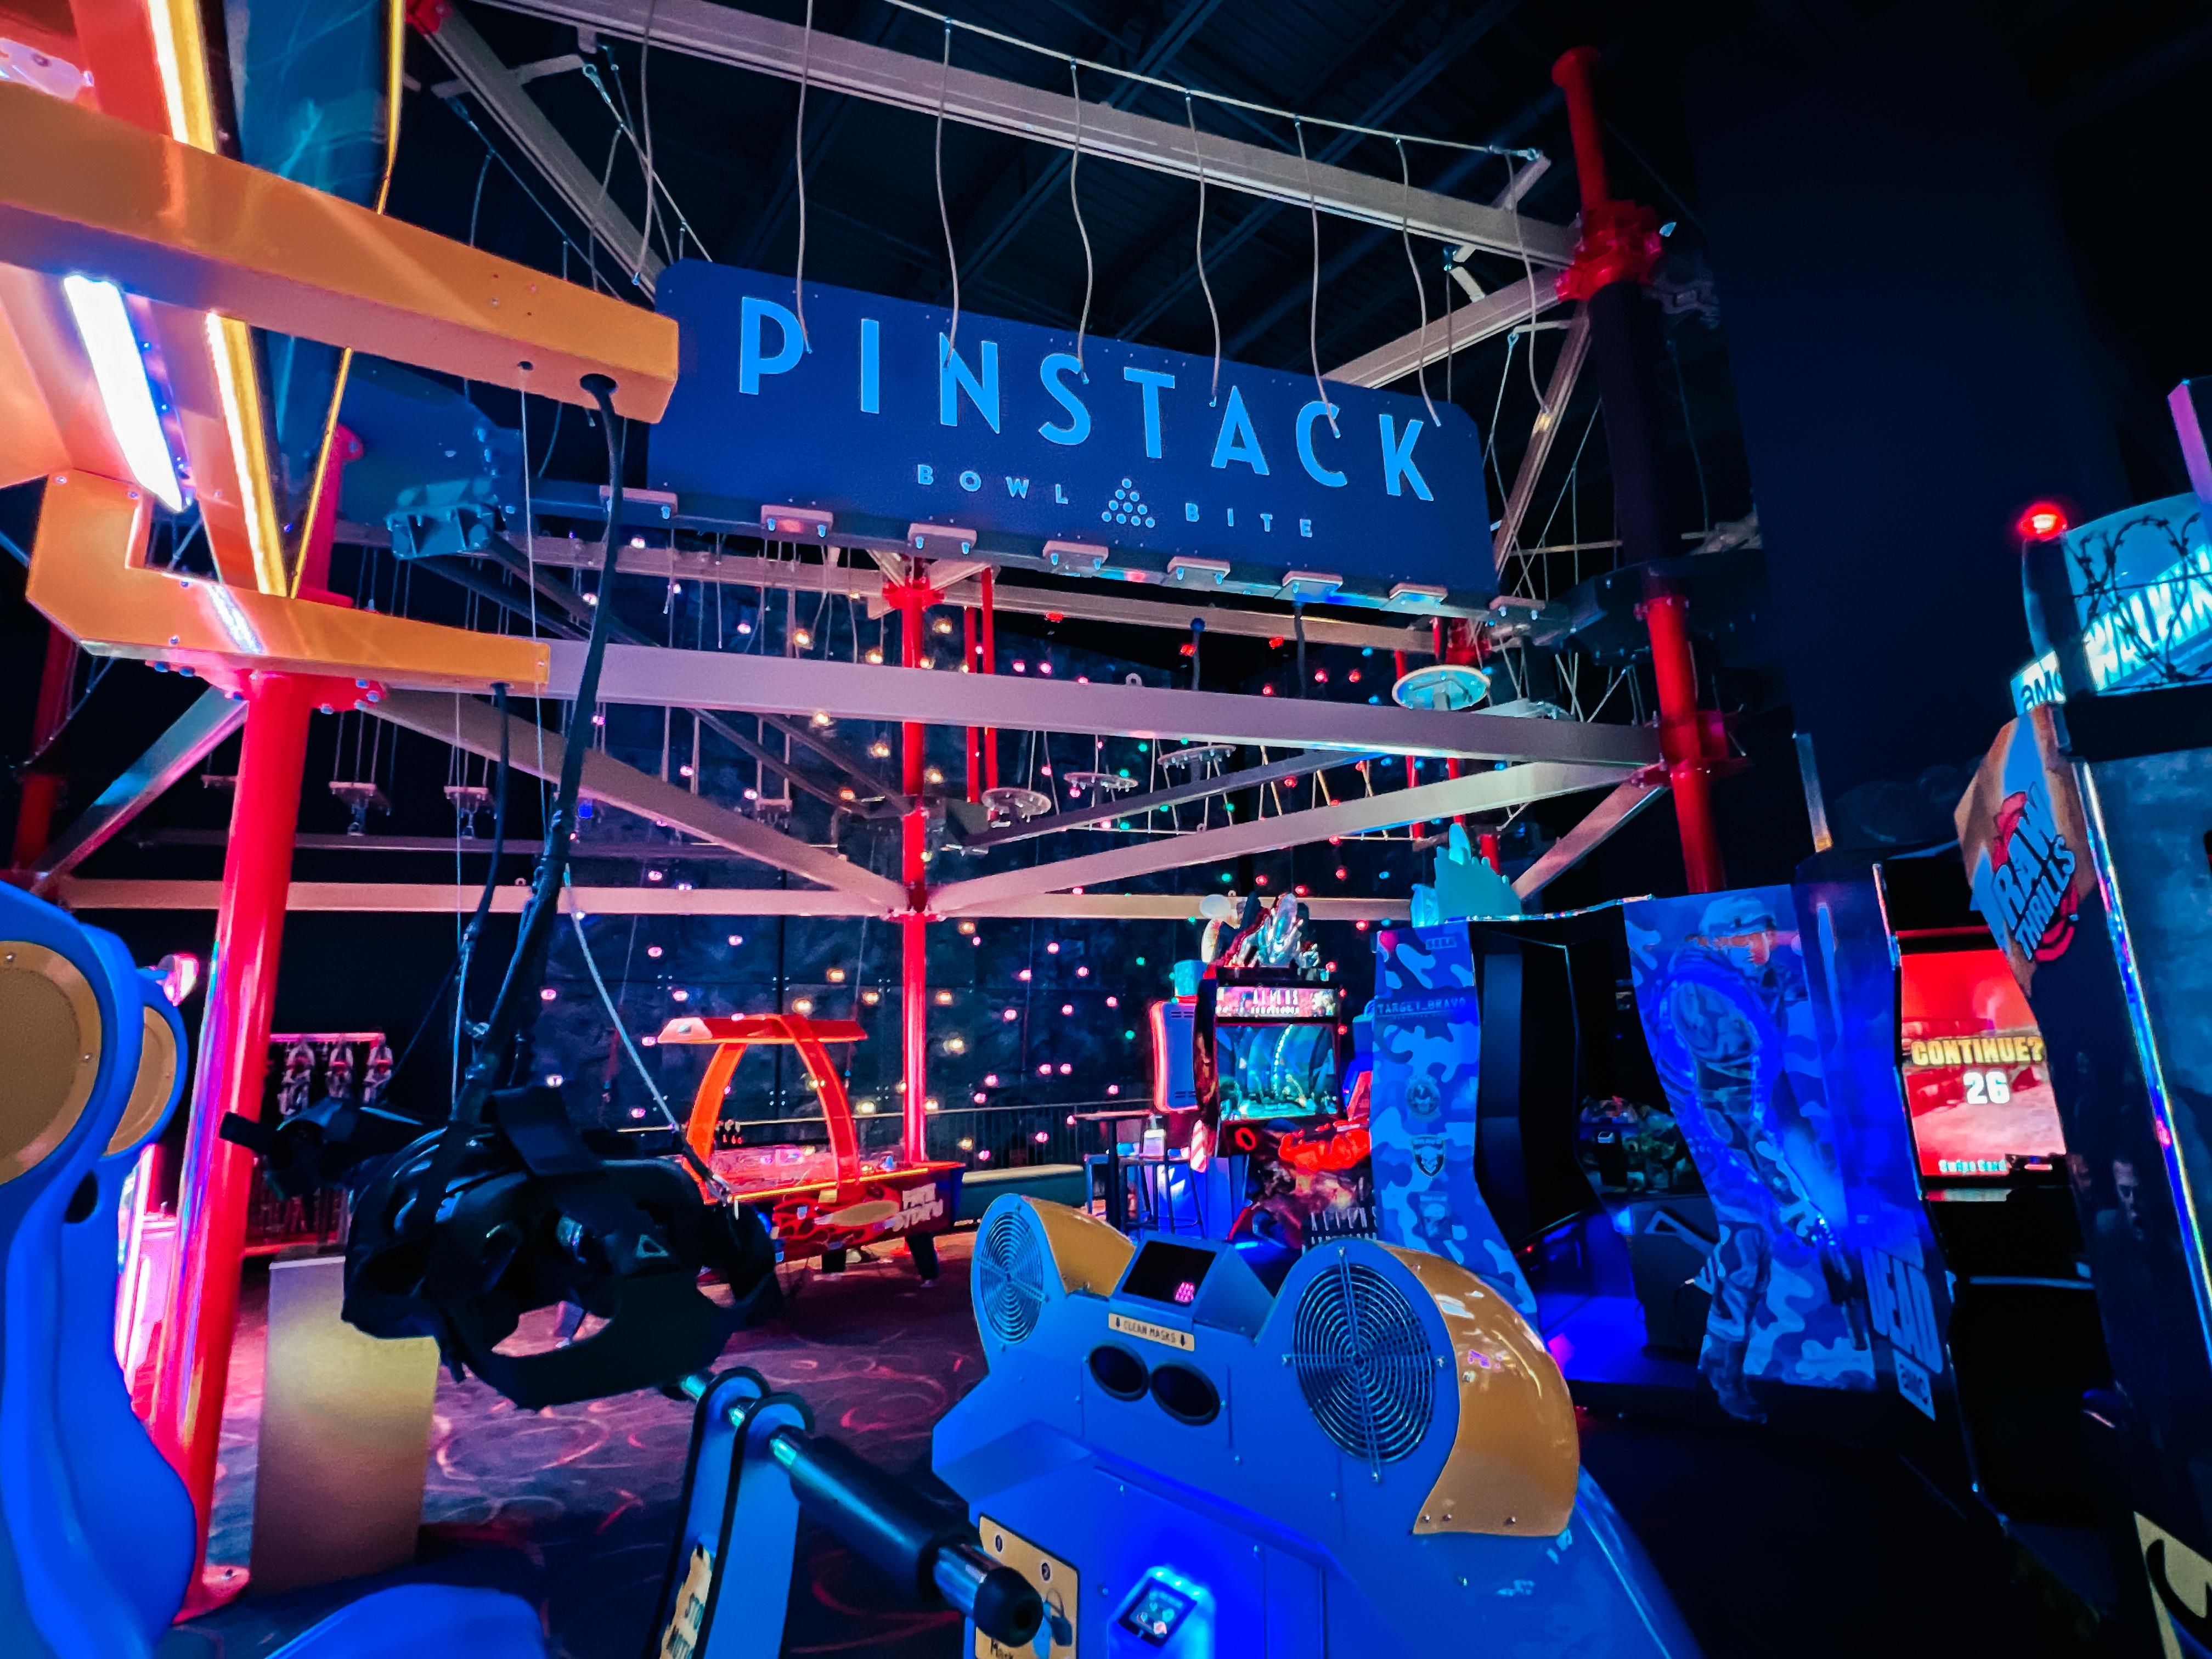 Tips for Winning Laser Tag for Adults - PINSTACK Bowl